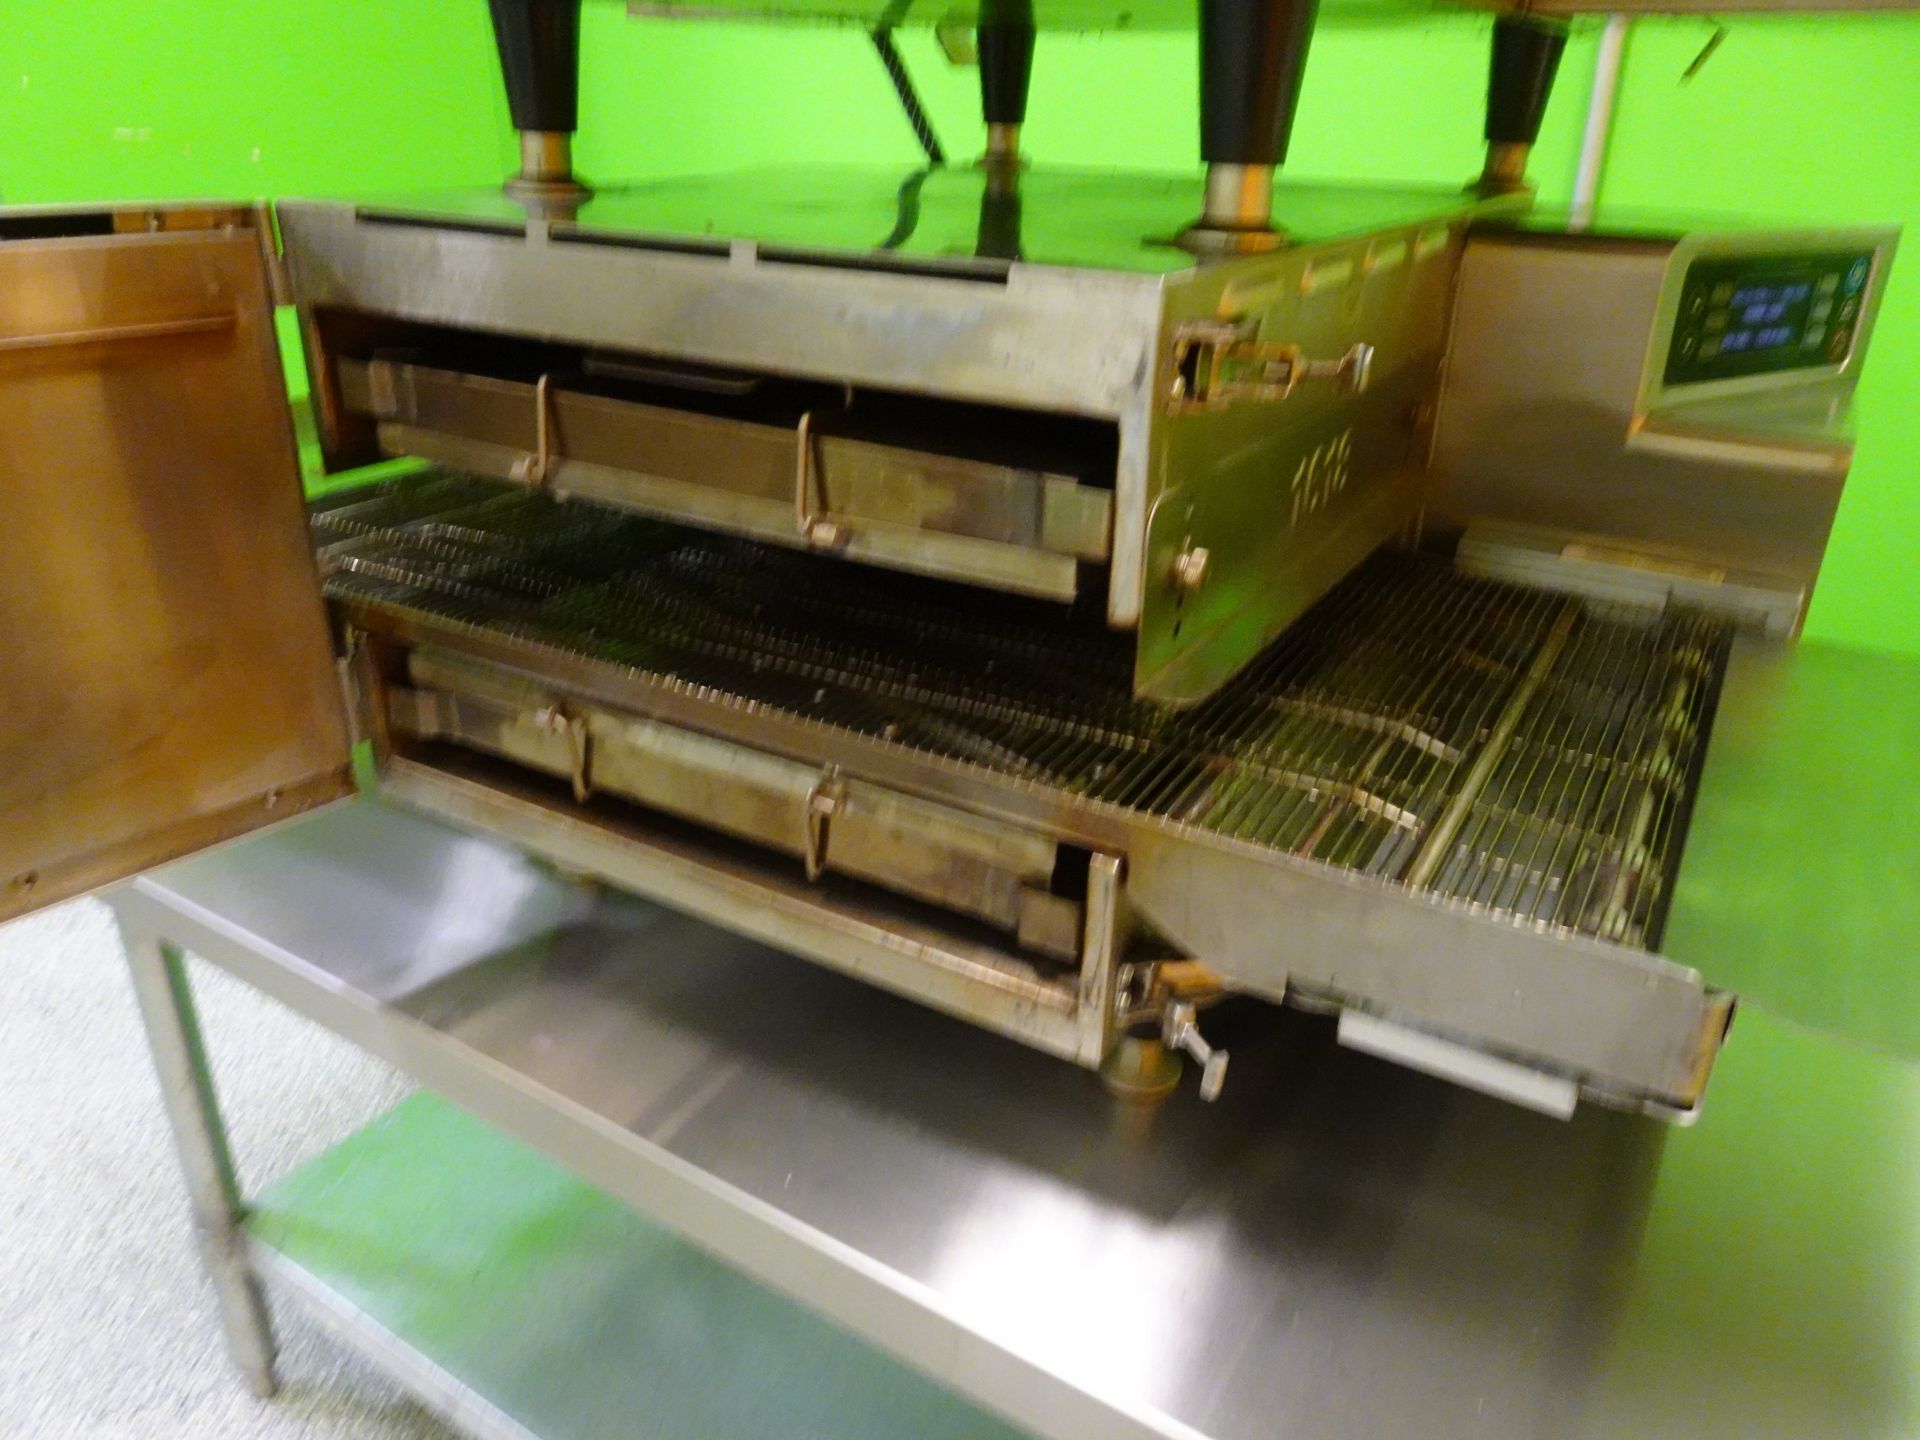 Turbo Chef high H Conveyor Commercial Oven S/N: HHC1618ED01082 - Image 11 of 13